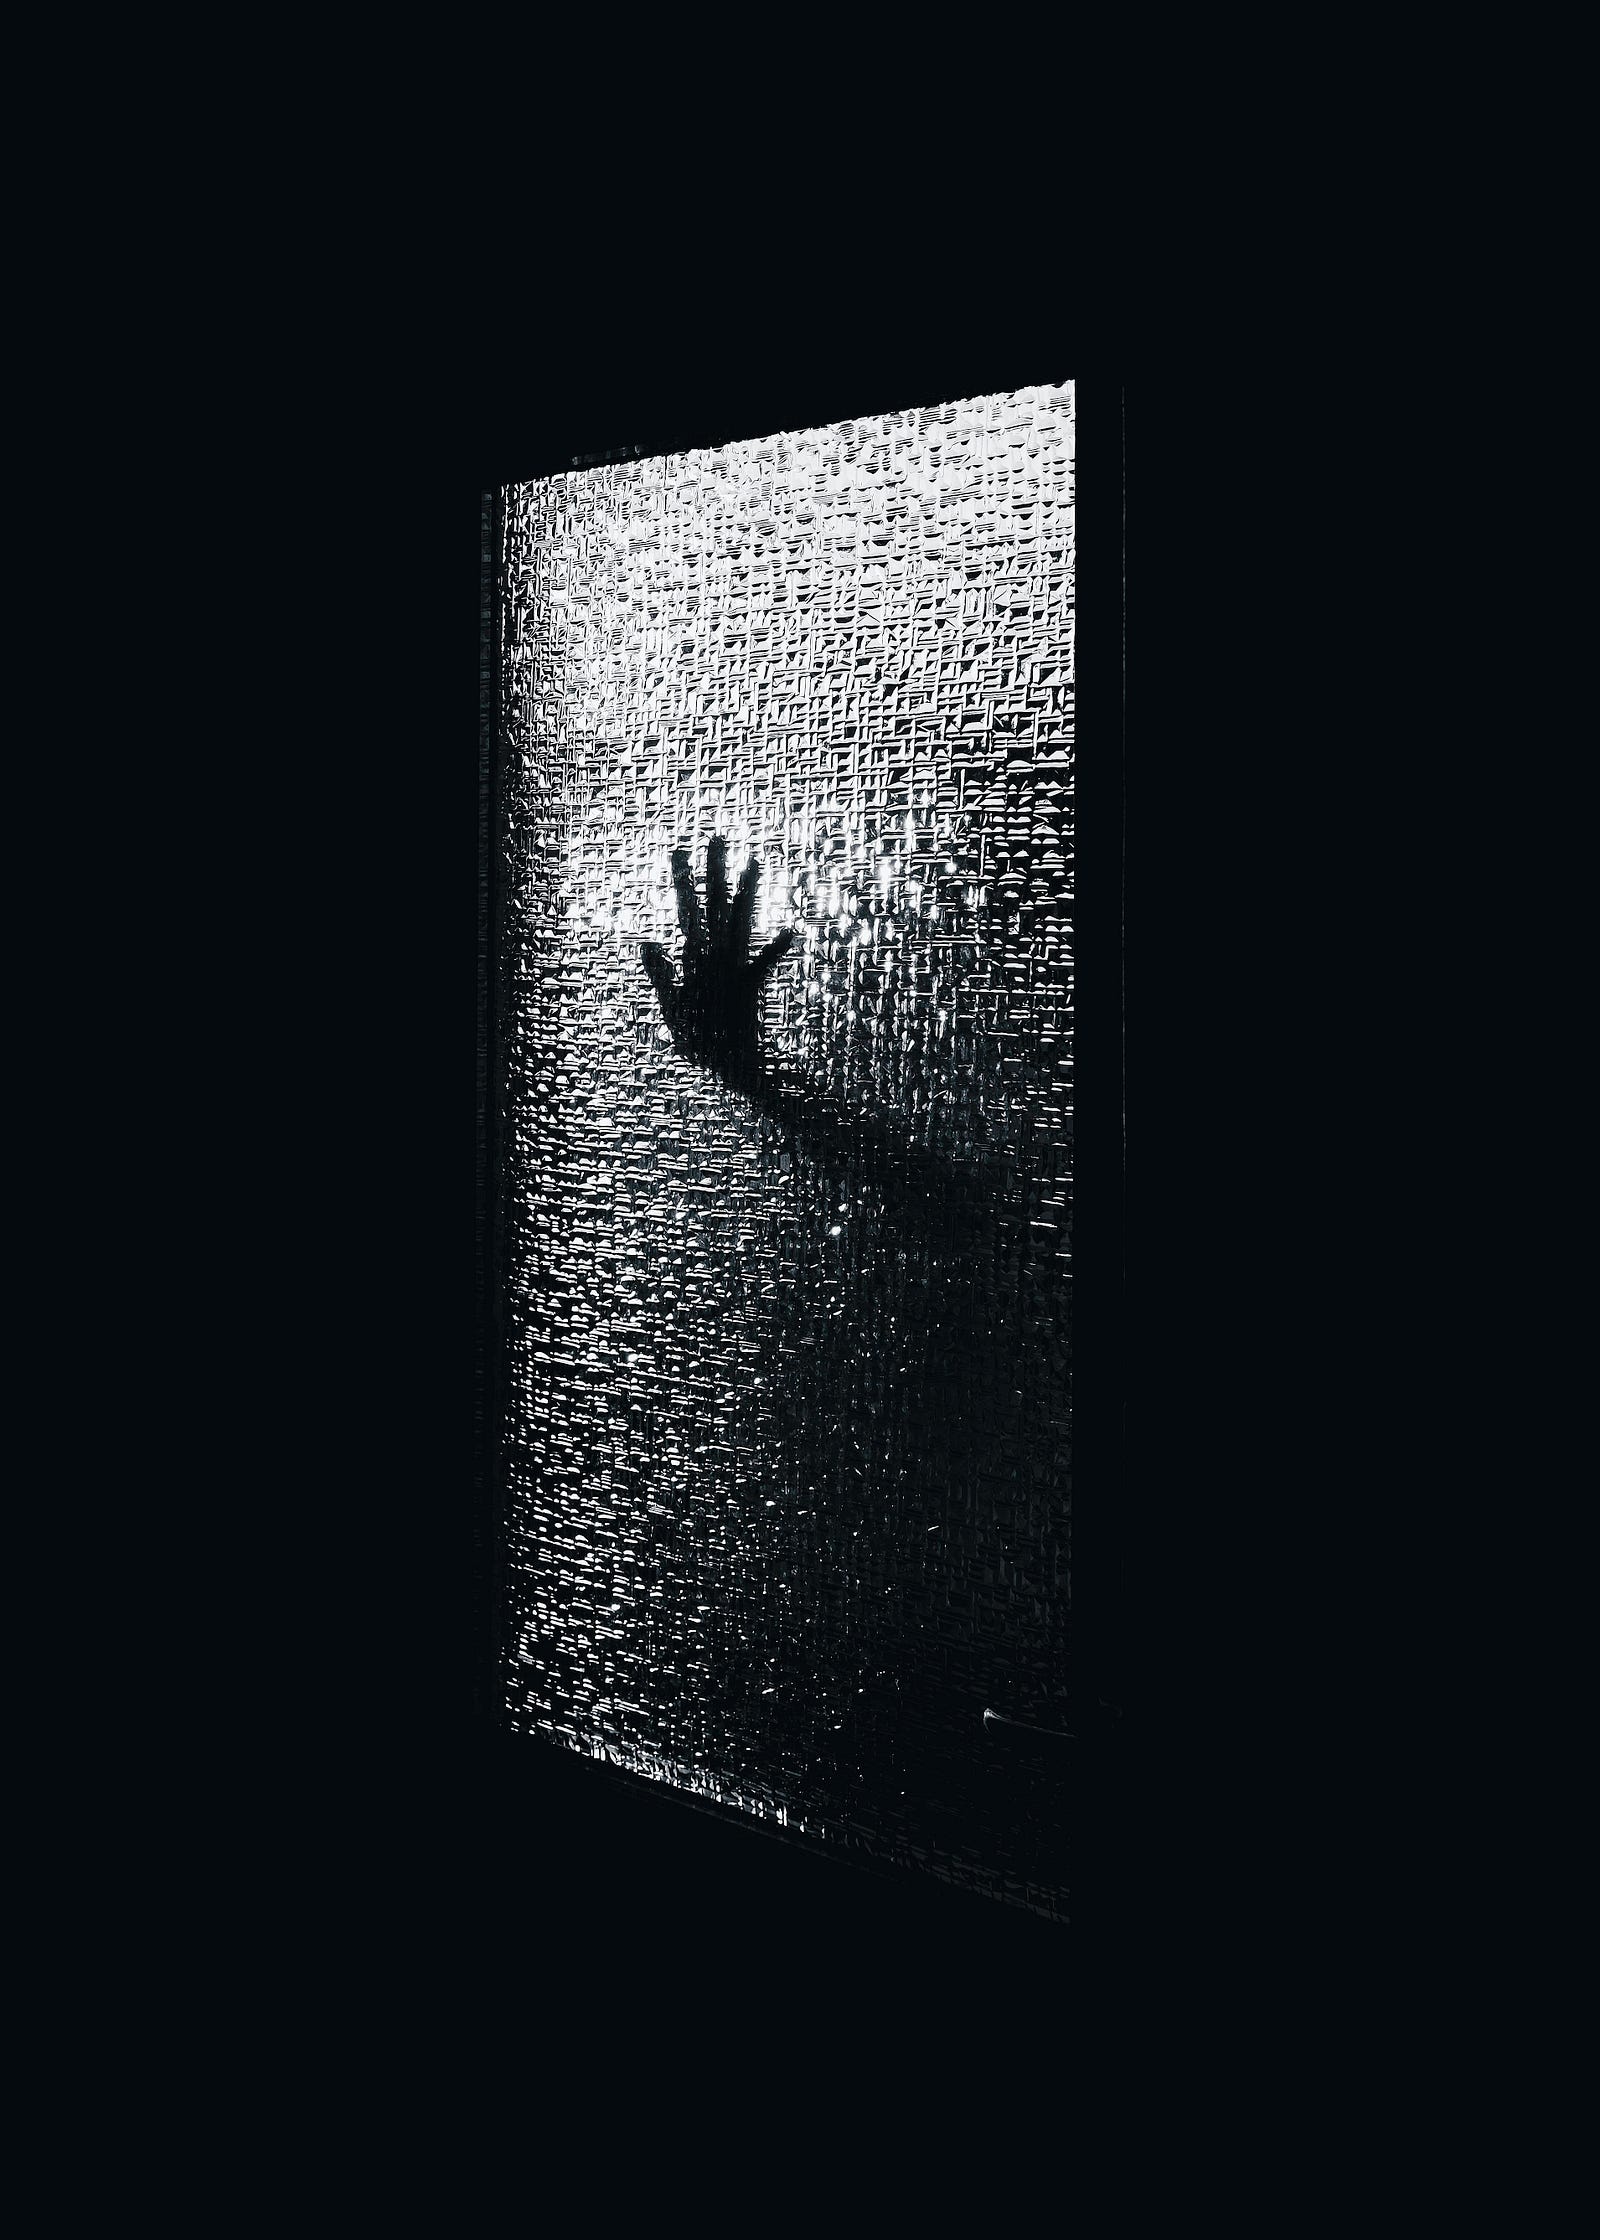 A black and white image of a hand pressing against a translucent window. We do not know the precise cause, but inherited genetics, biology, and life experiences (especially stressful ones) can play roles in generalized anxiety disorder.